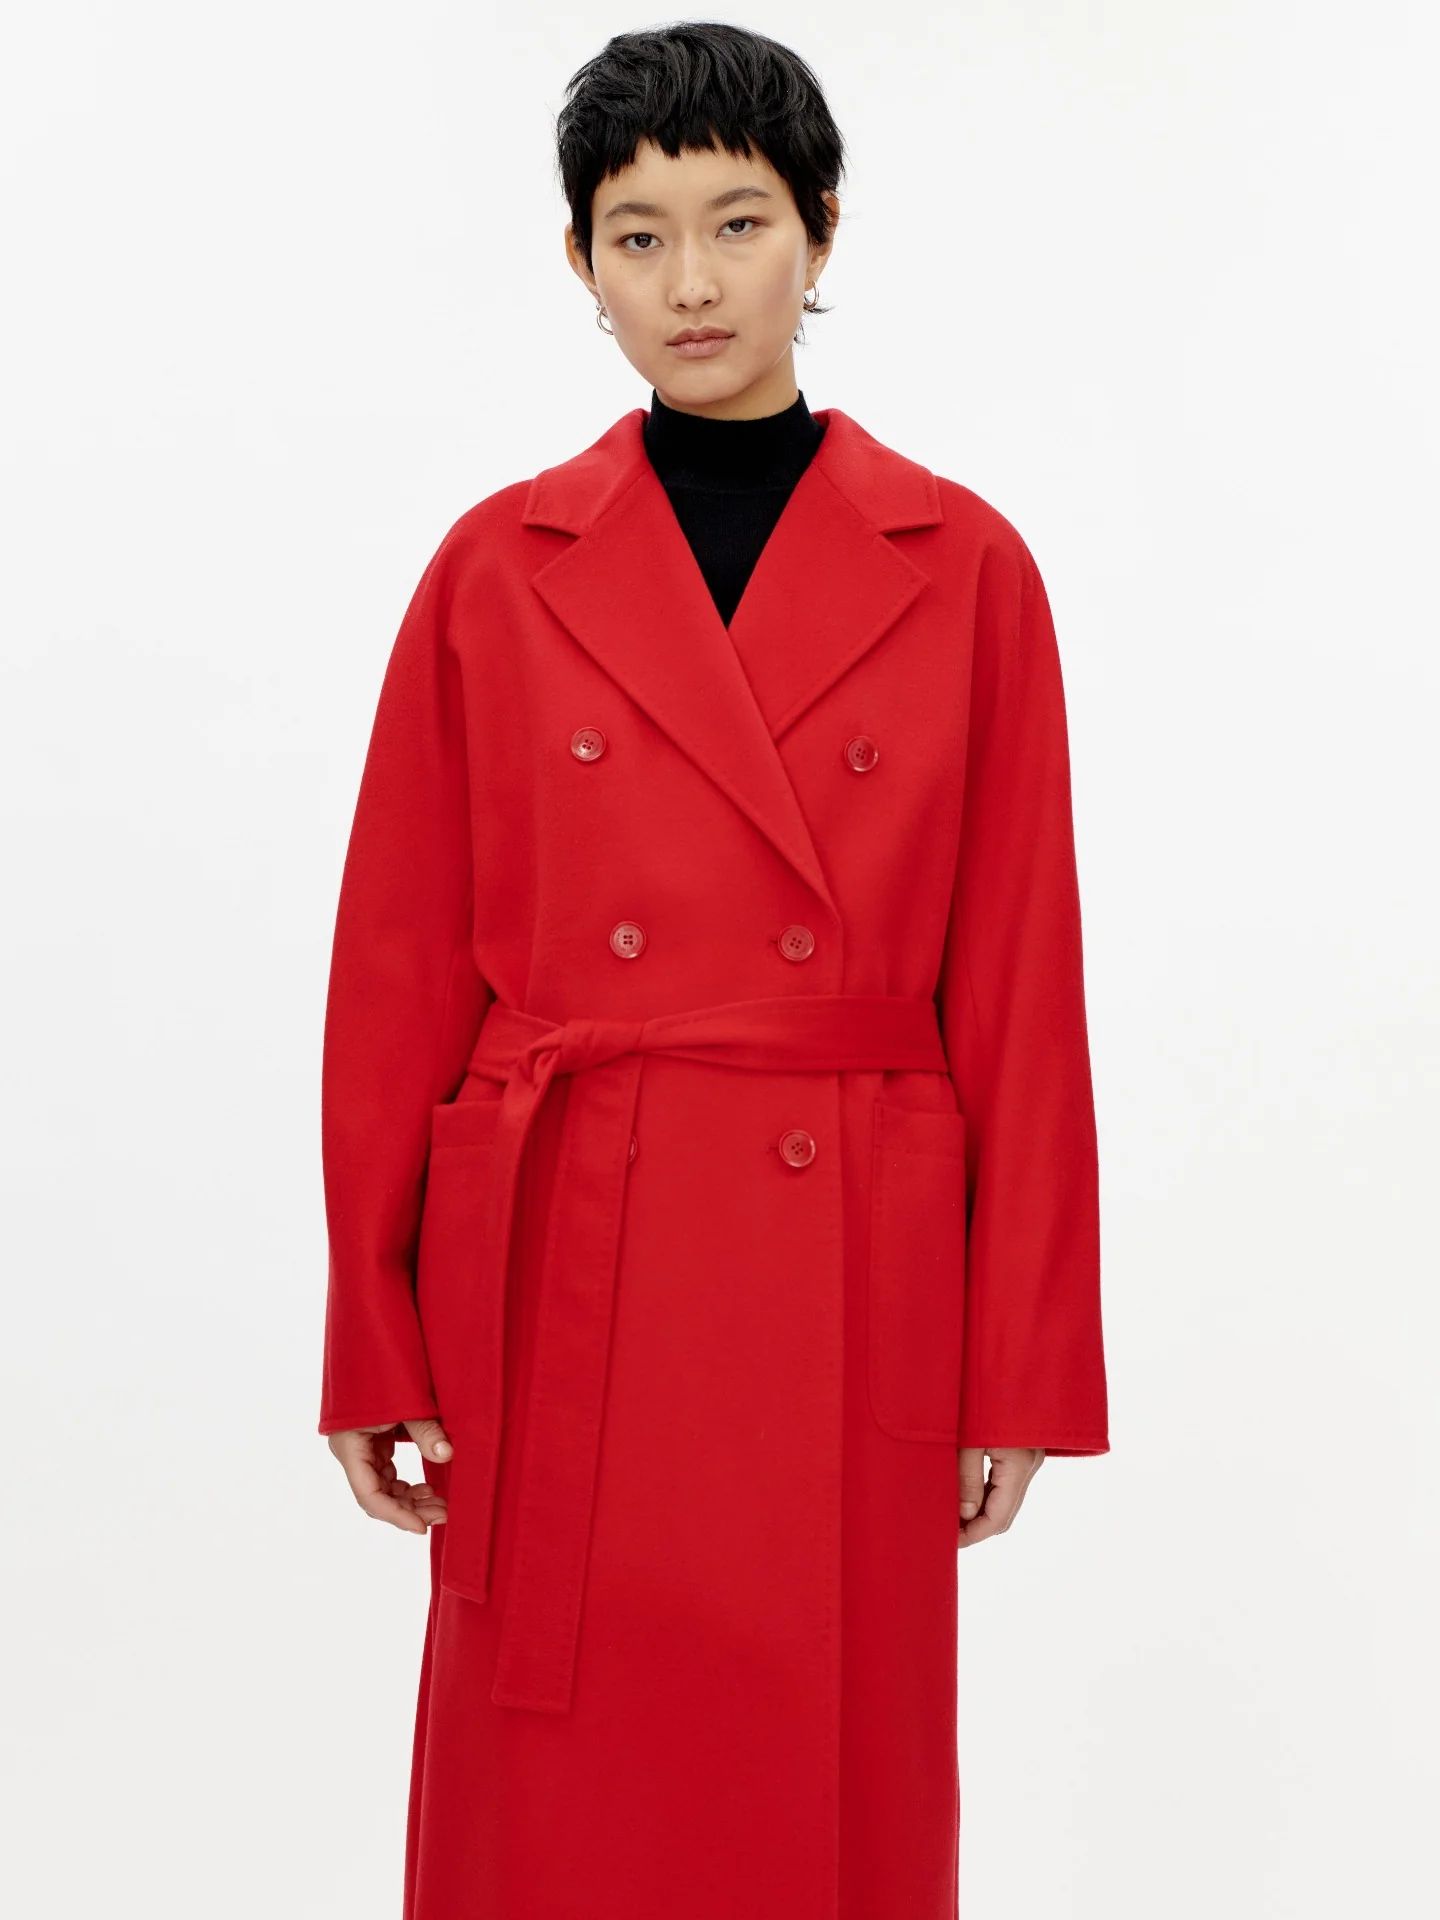 Women's Cashmere Double-Breasted Long Coat Red - Gobi Cashmere | Gobi Cashmere